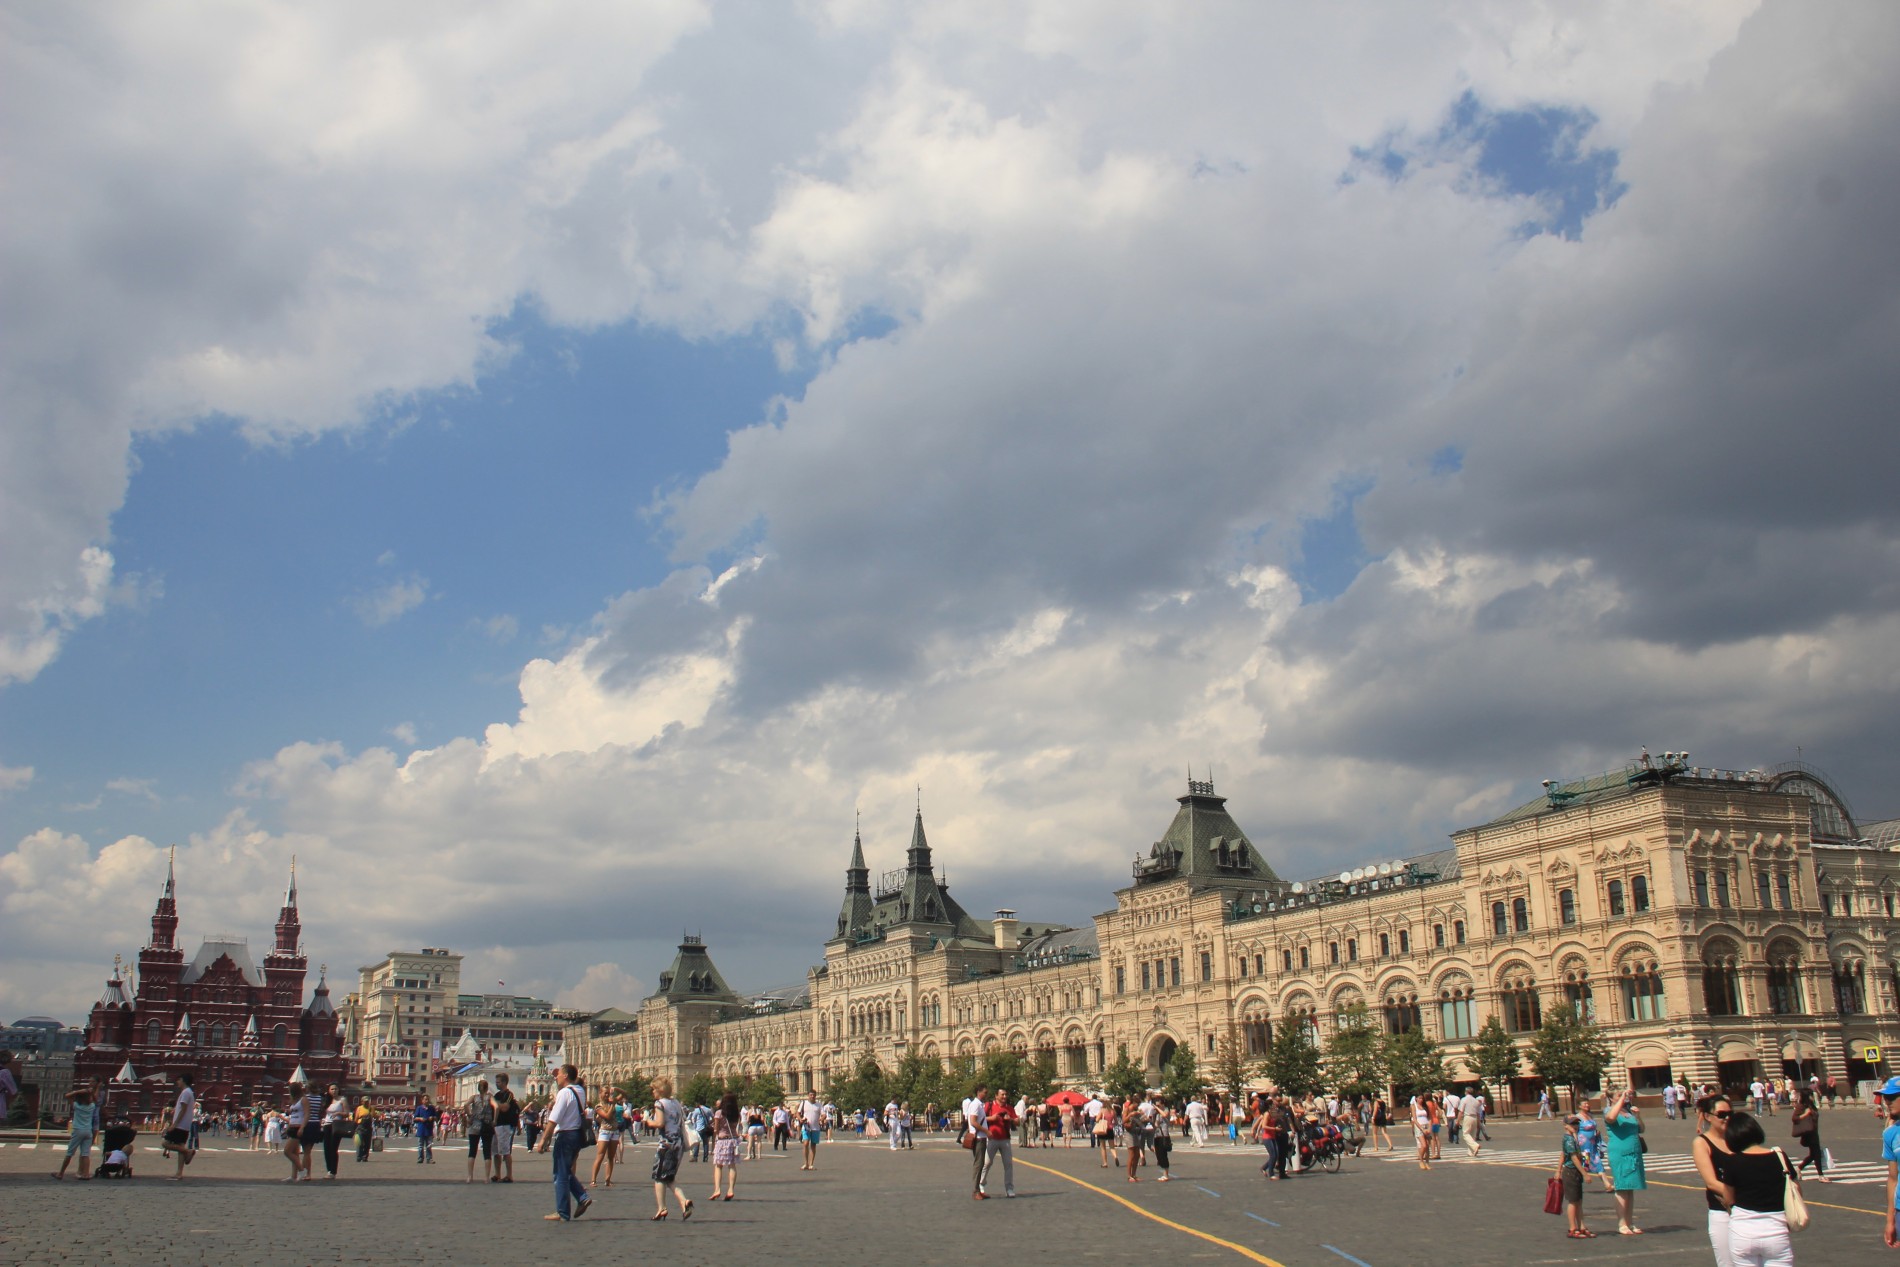 The luxury GUM department store and the State Historical Museum flank Moscow's Red Square.